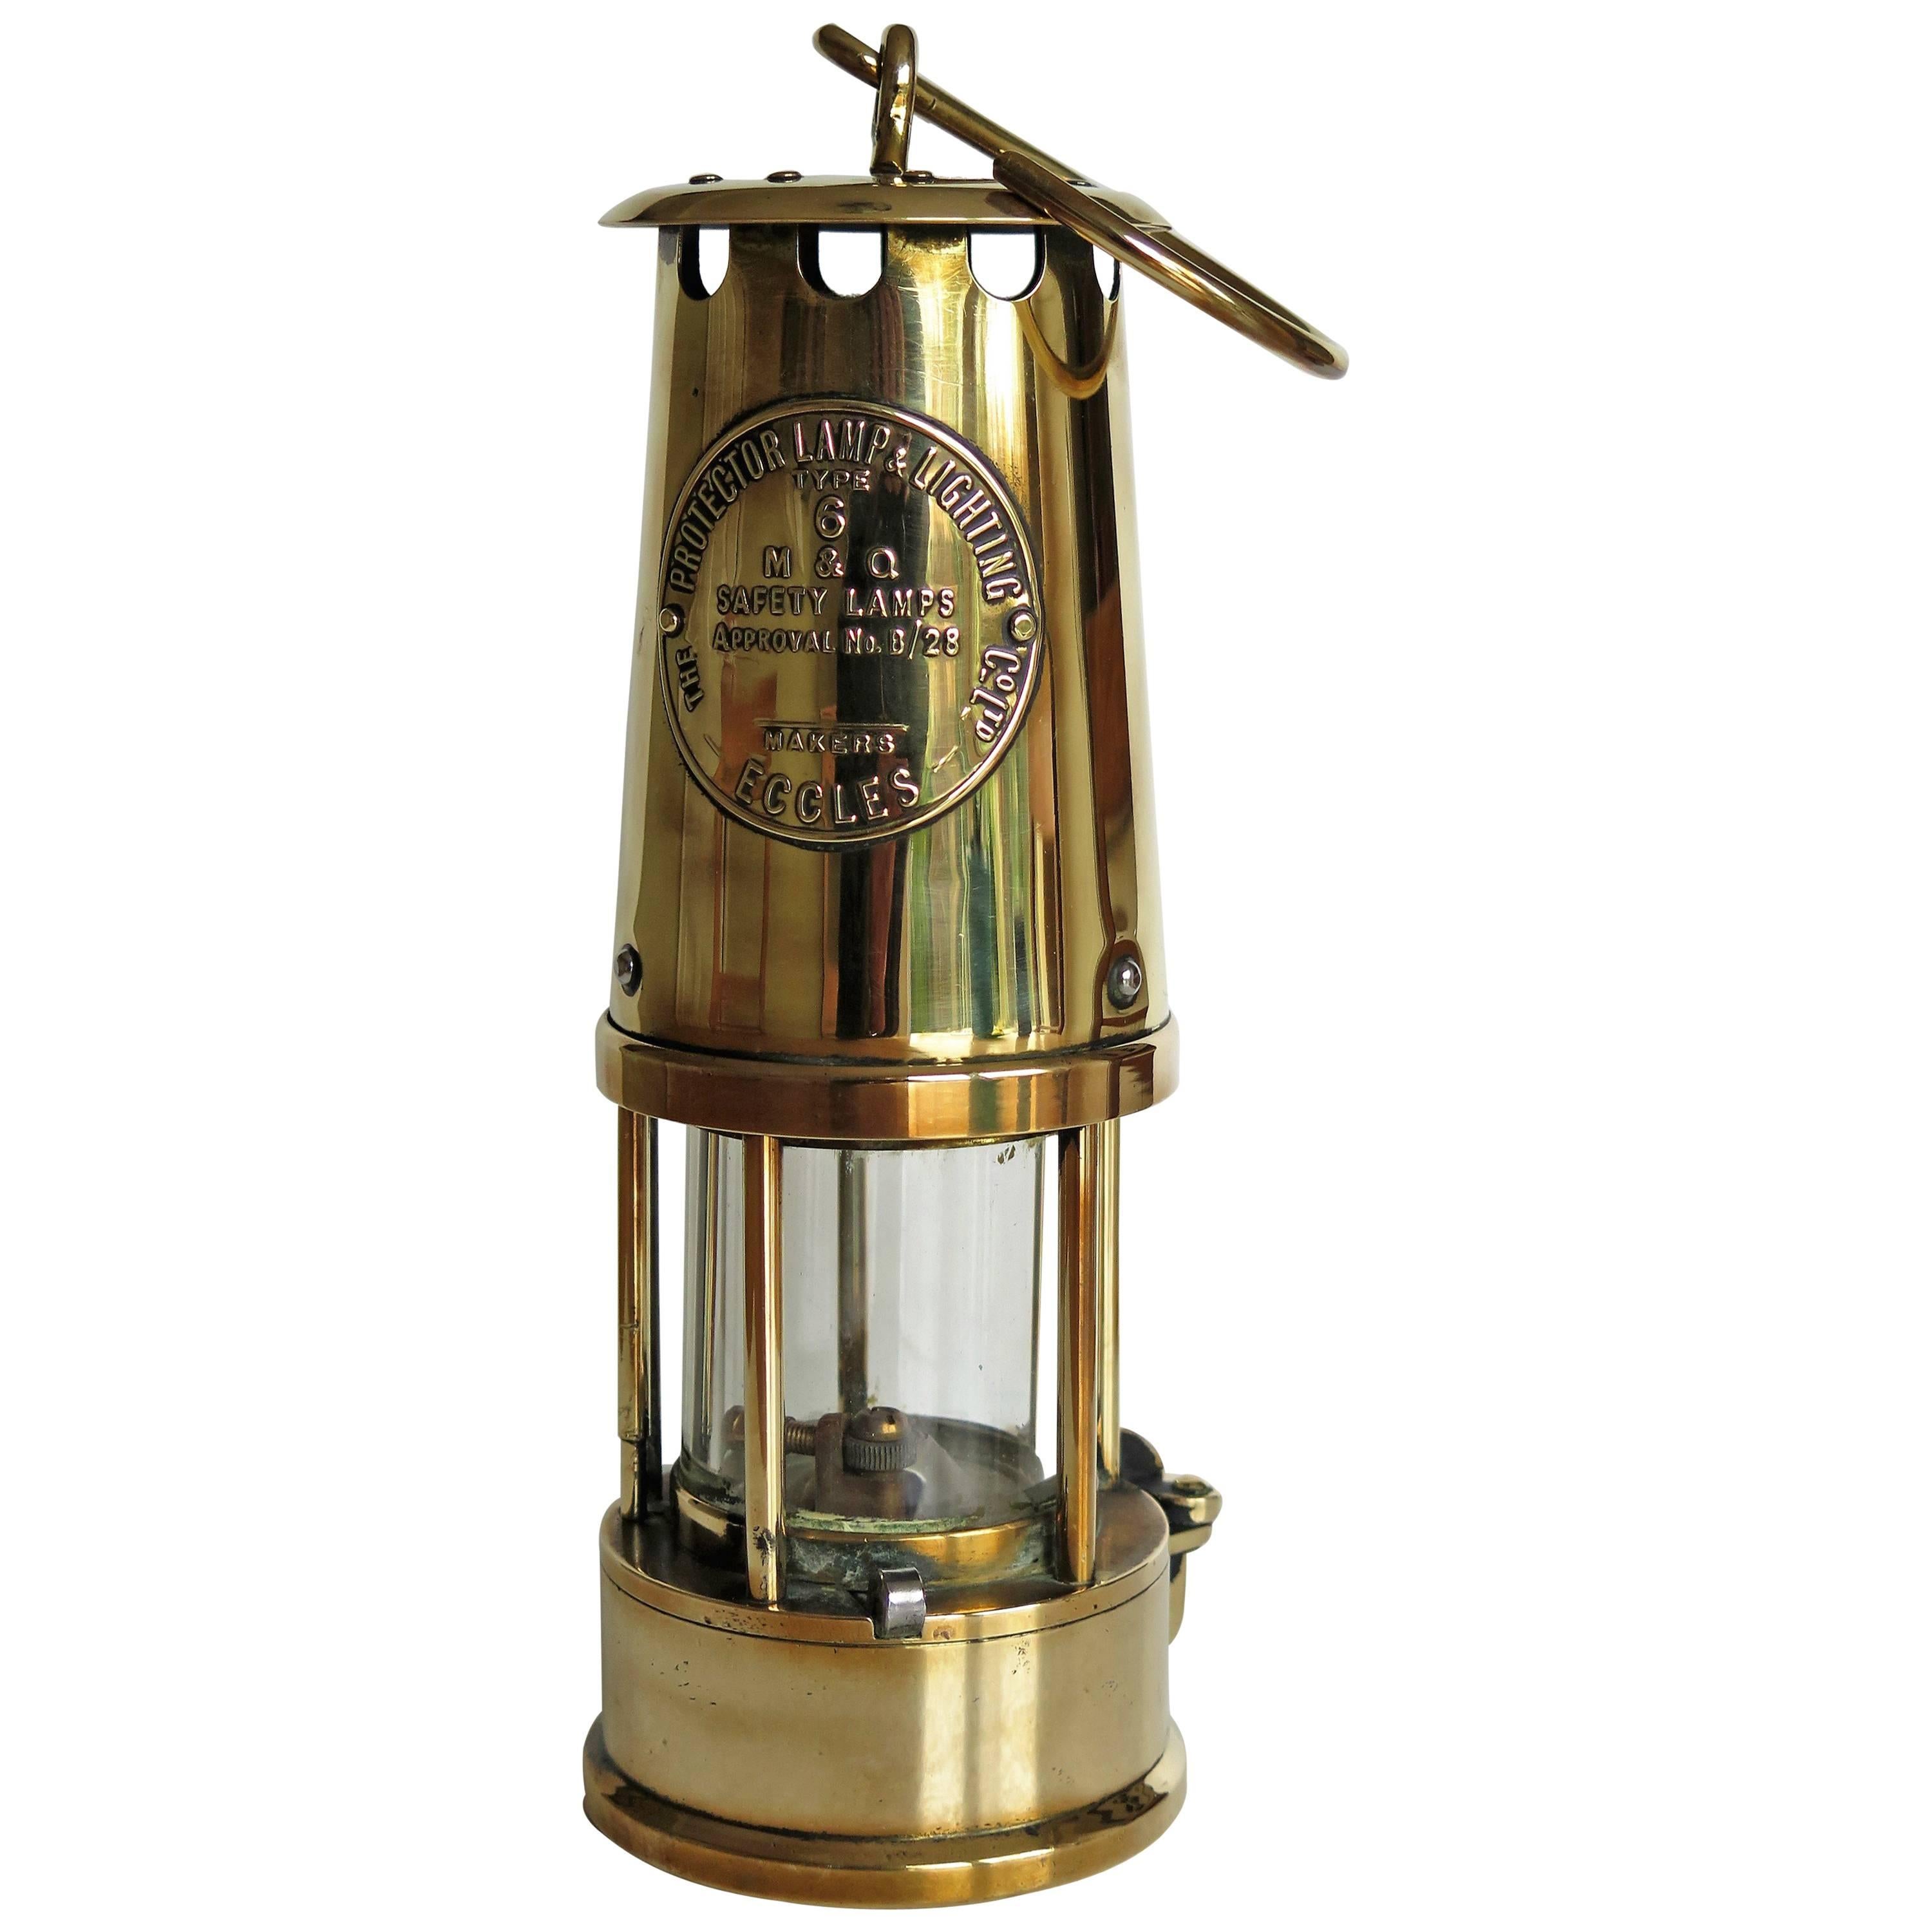 Miner's Lamp All Brass Eccles Type 6 Protector Lamp & Lighting Co, Circa 1930